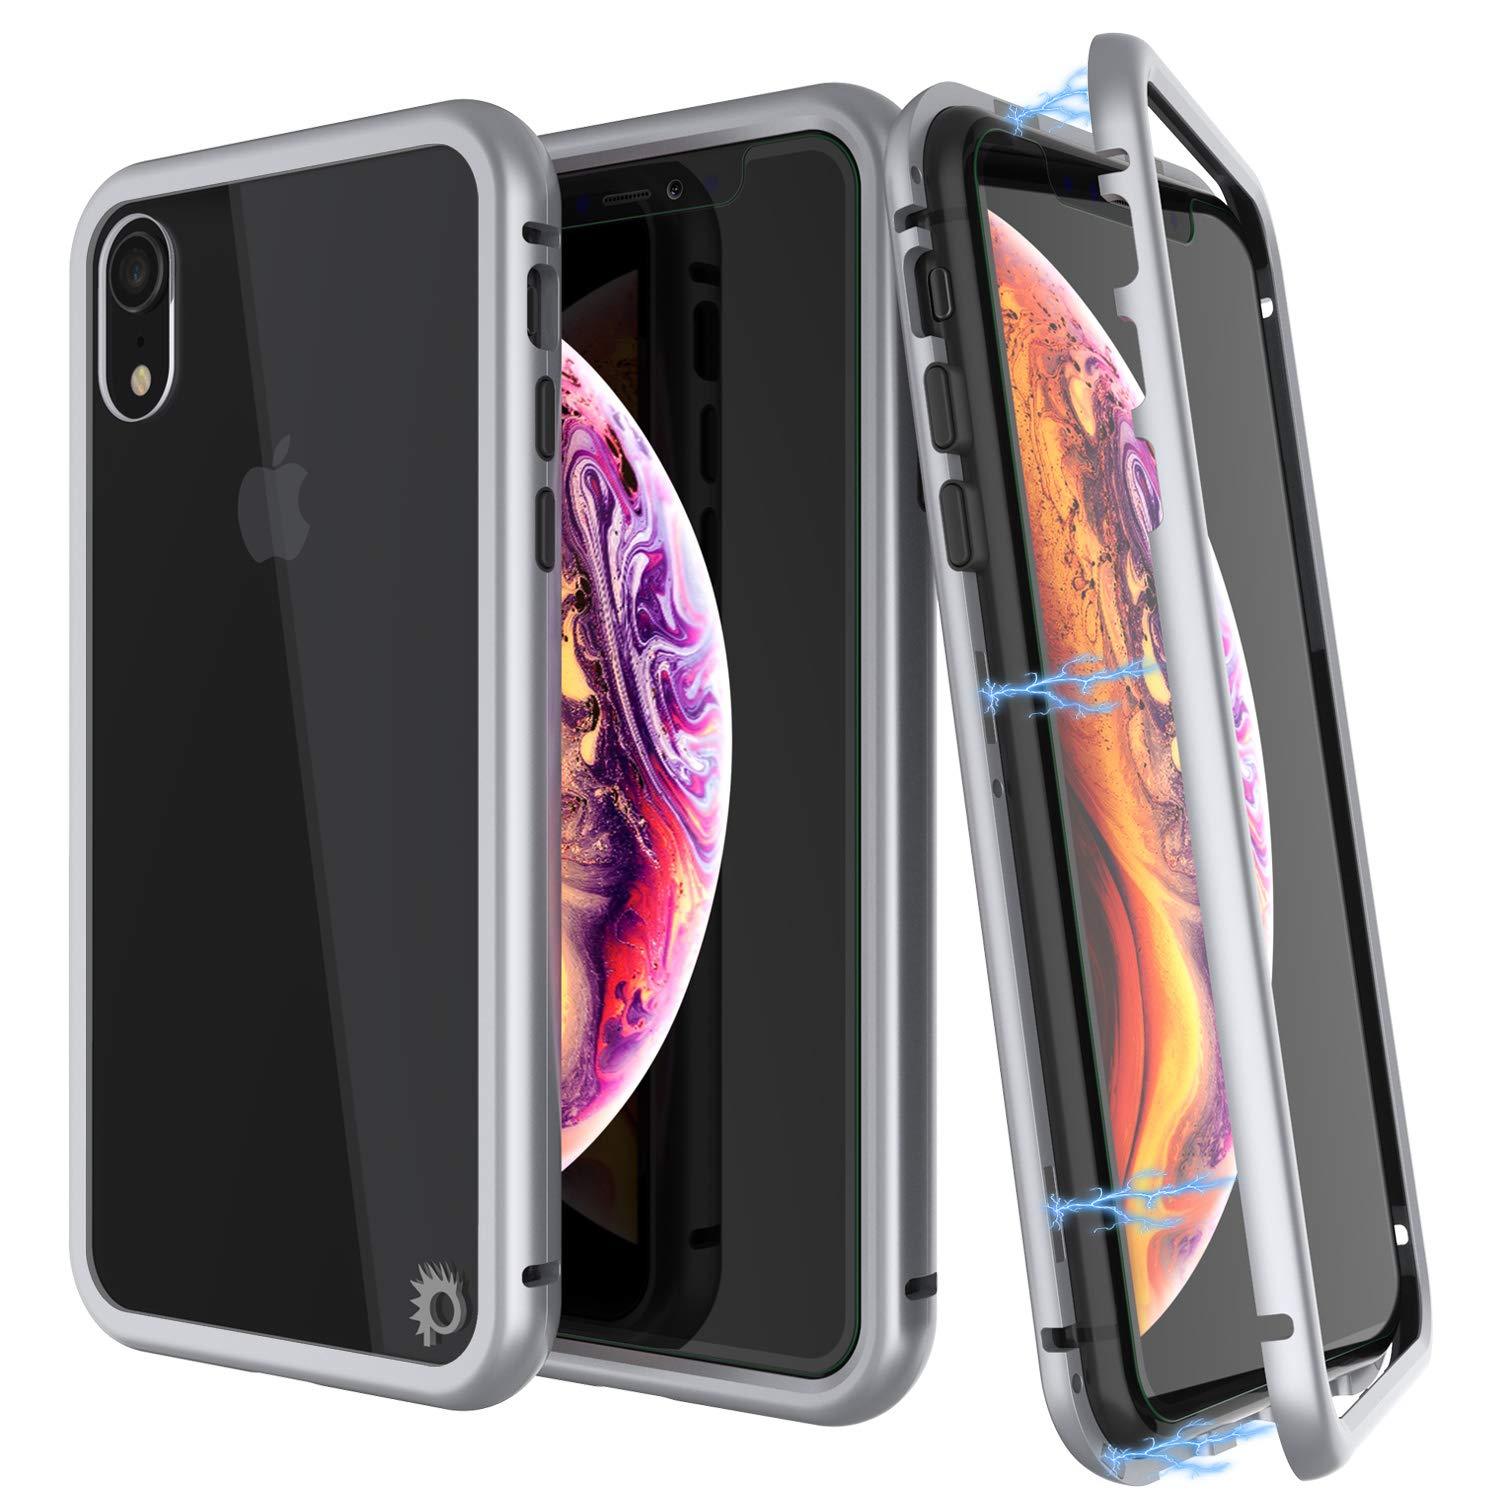 iPhone XR Case, Punkcase Magnetic Shield Protective TPU Cover W/ Tempered Glass Screen Protector [Silver]